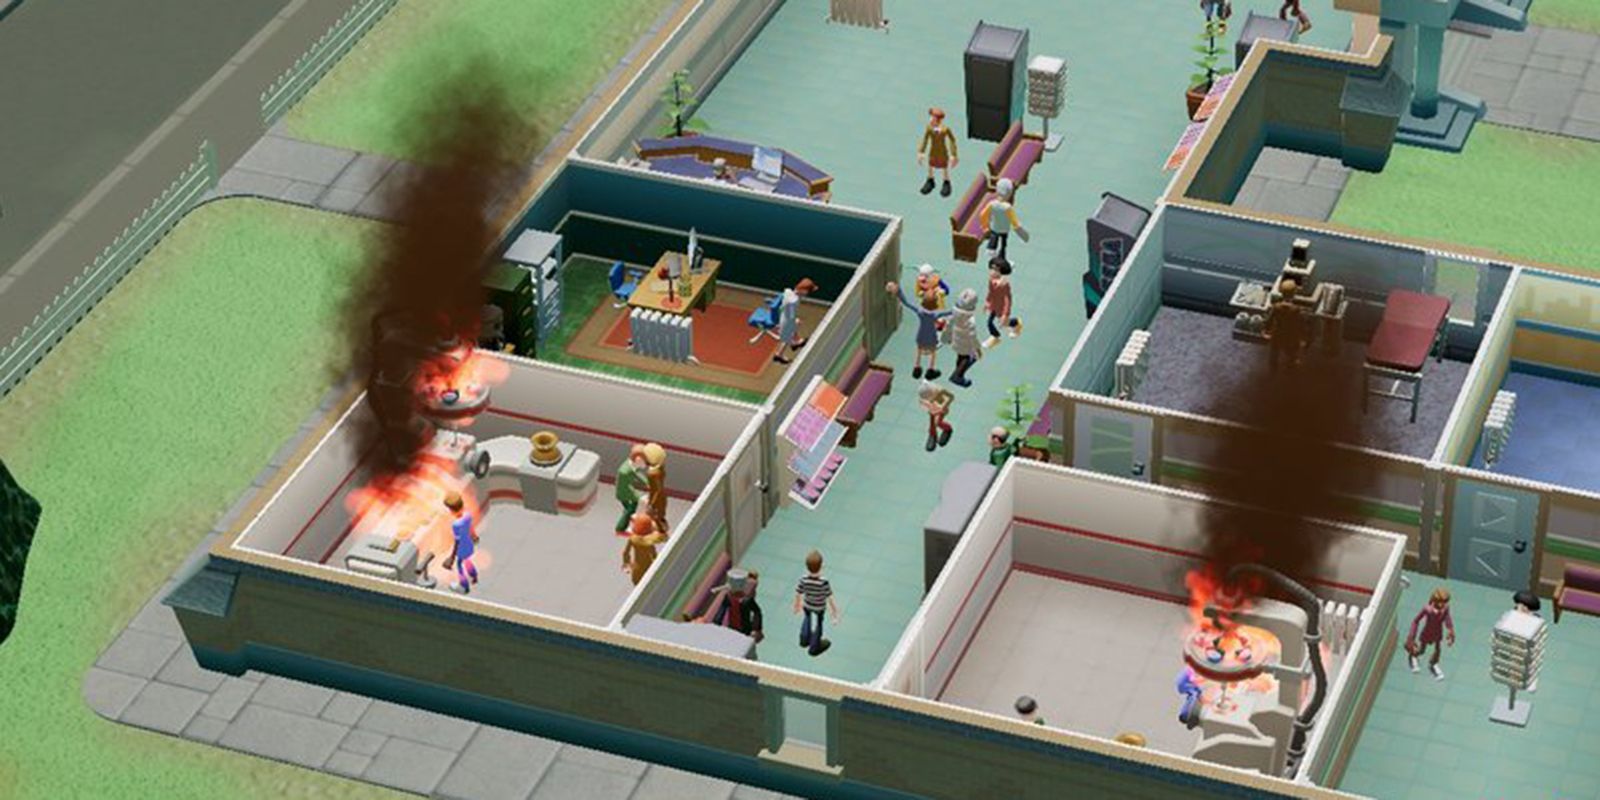 Two fires in Two Point Hospital